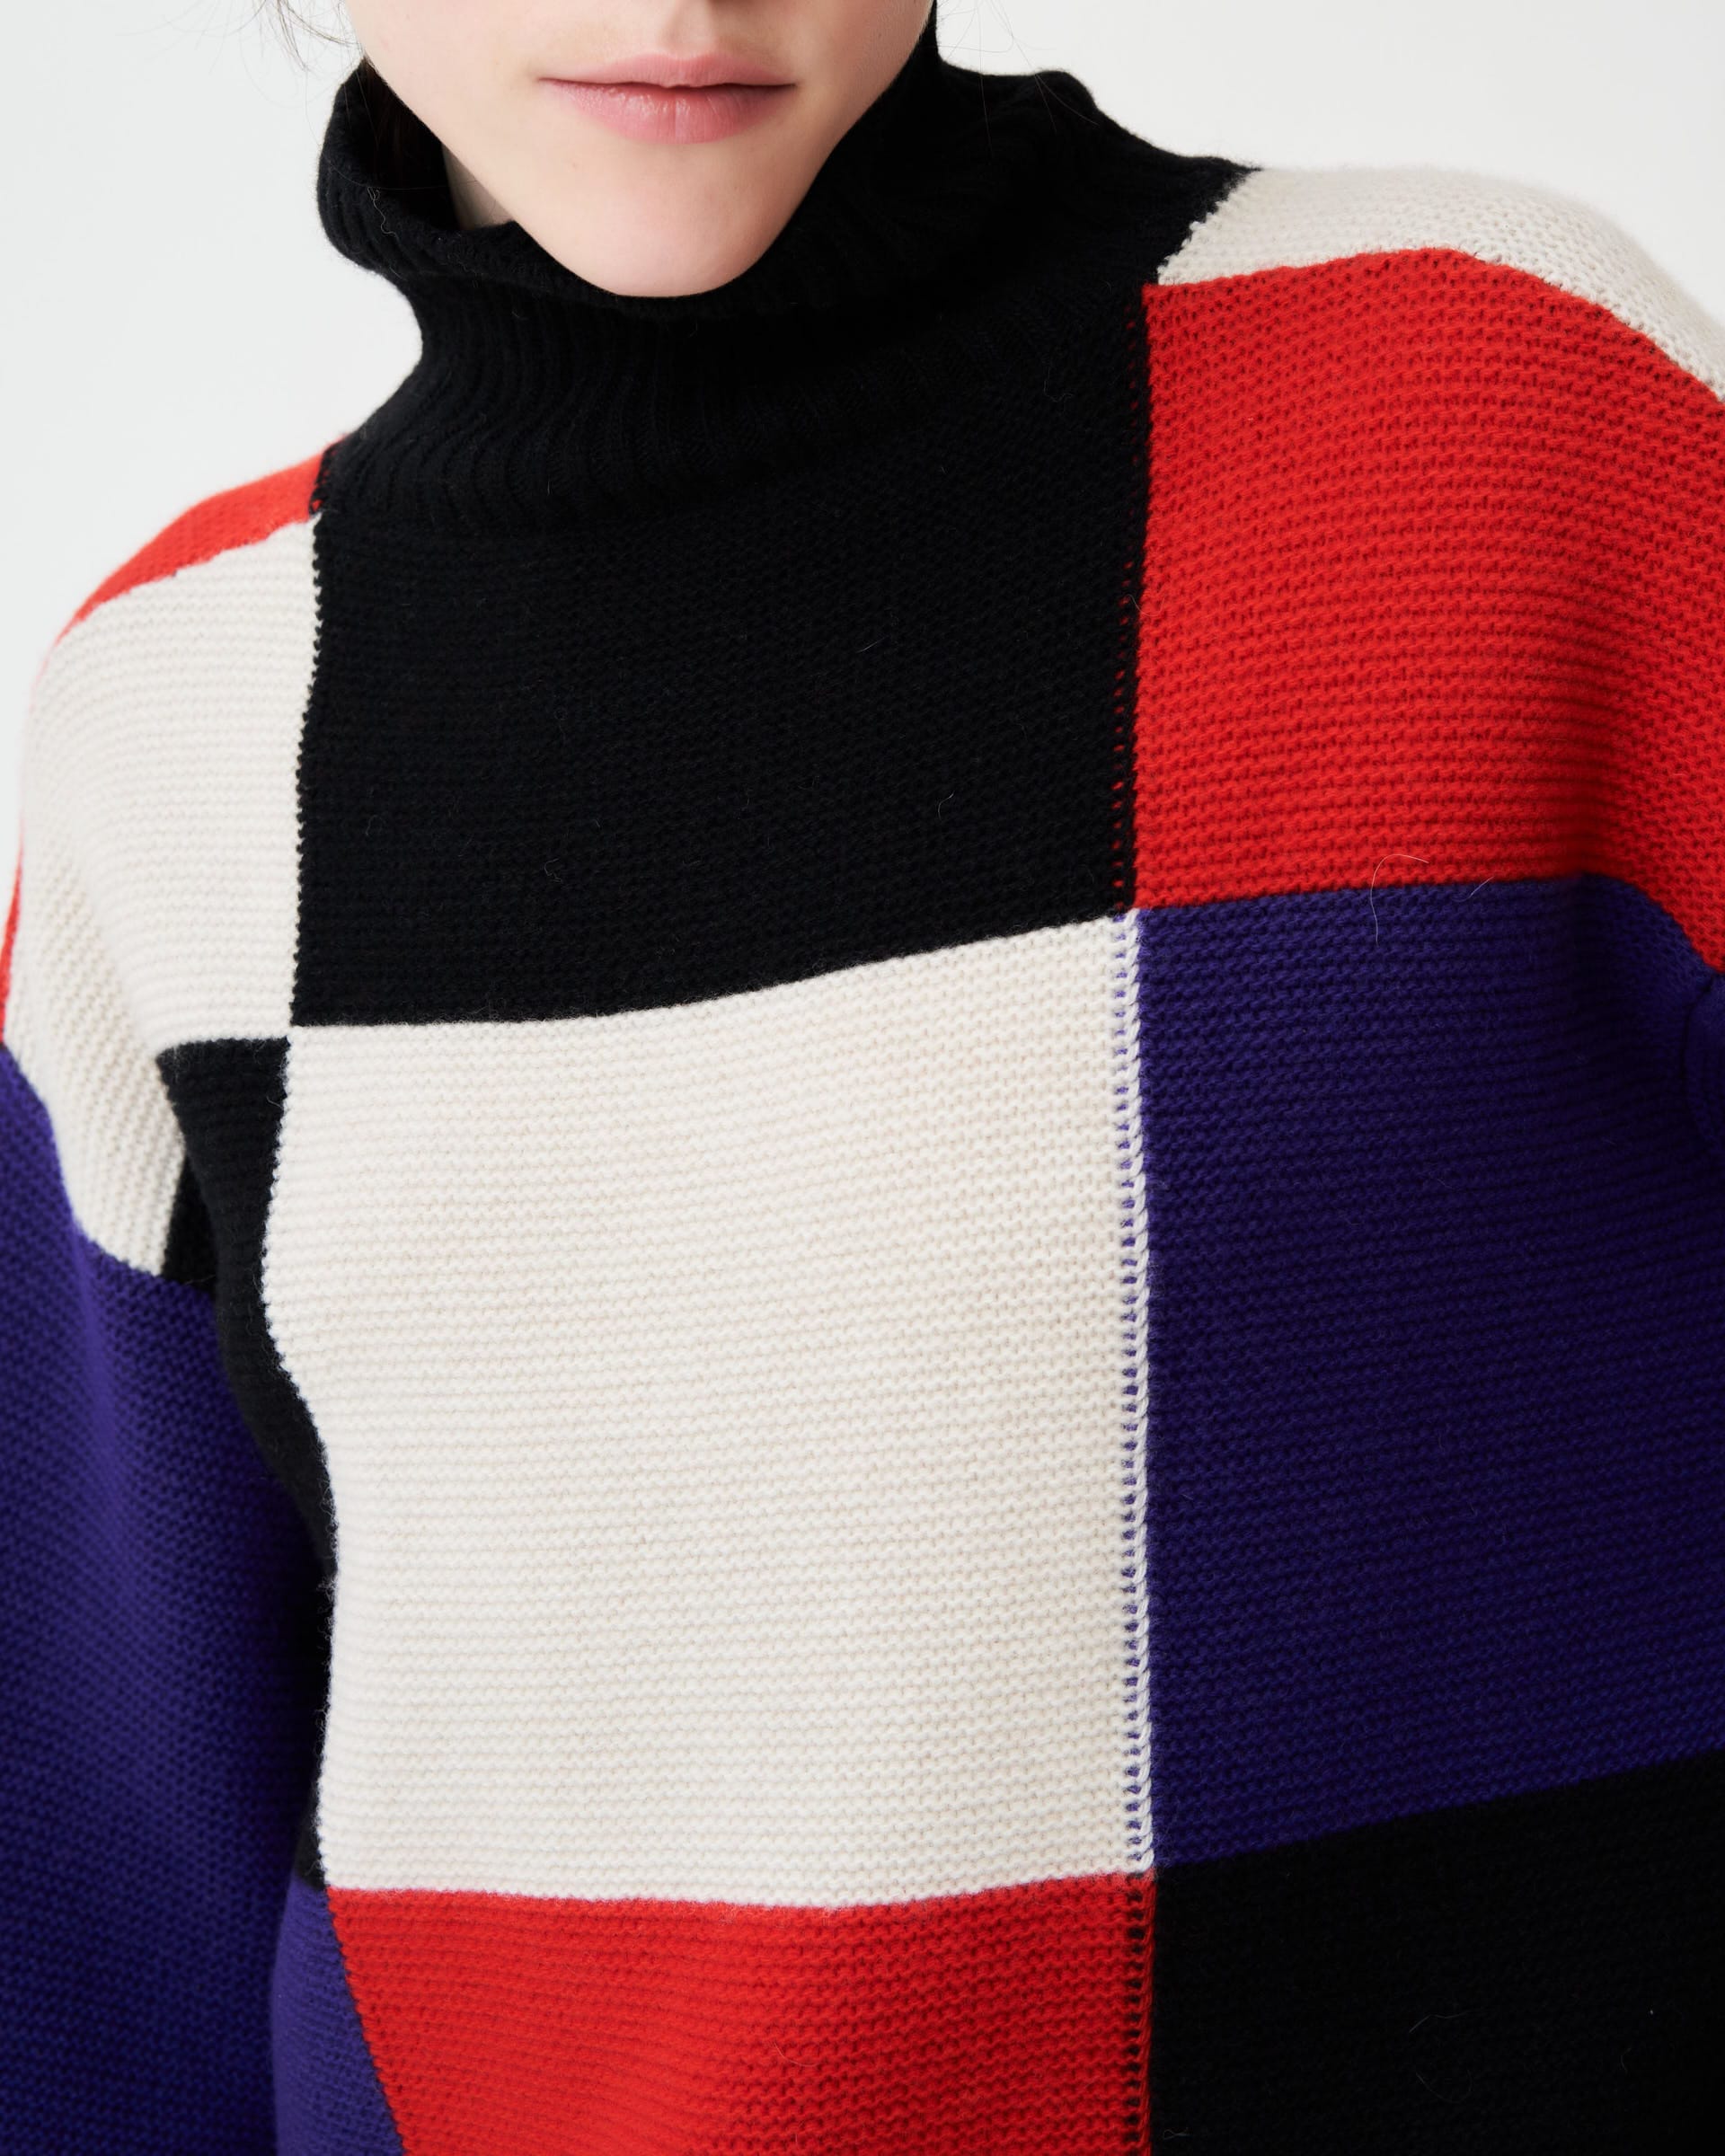 The Market Store | High Neck Sweater With Check Inlays